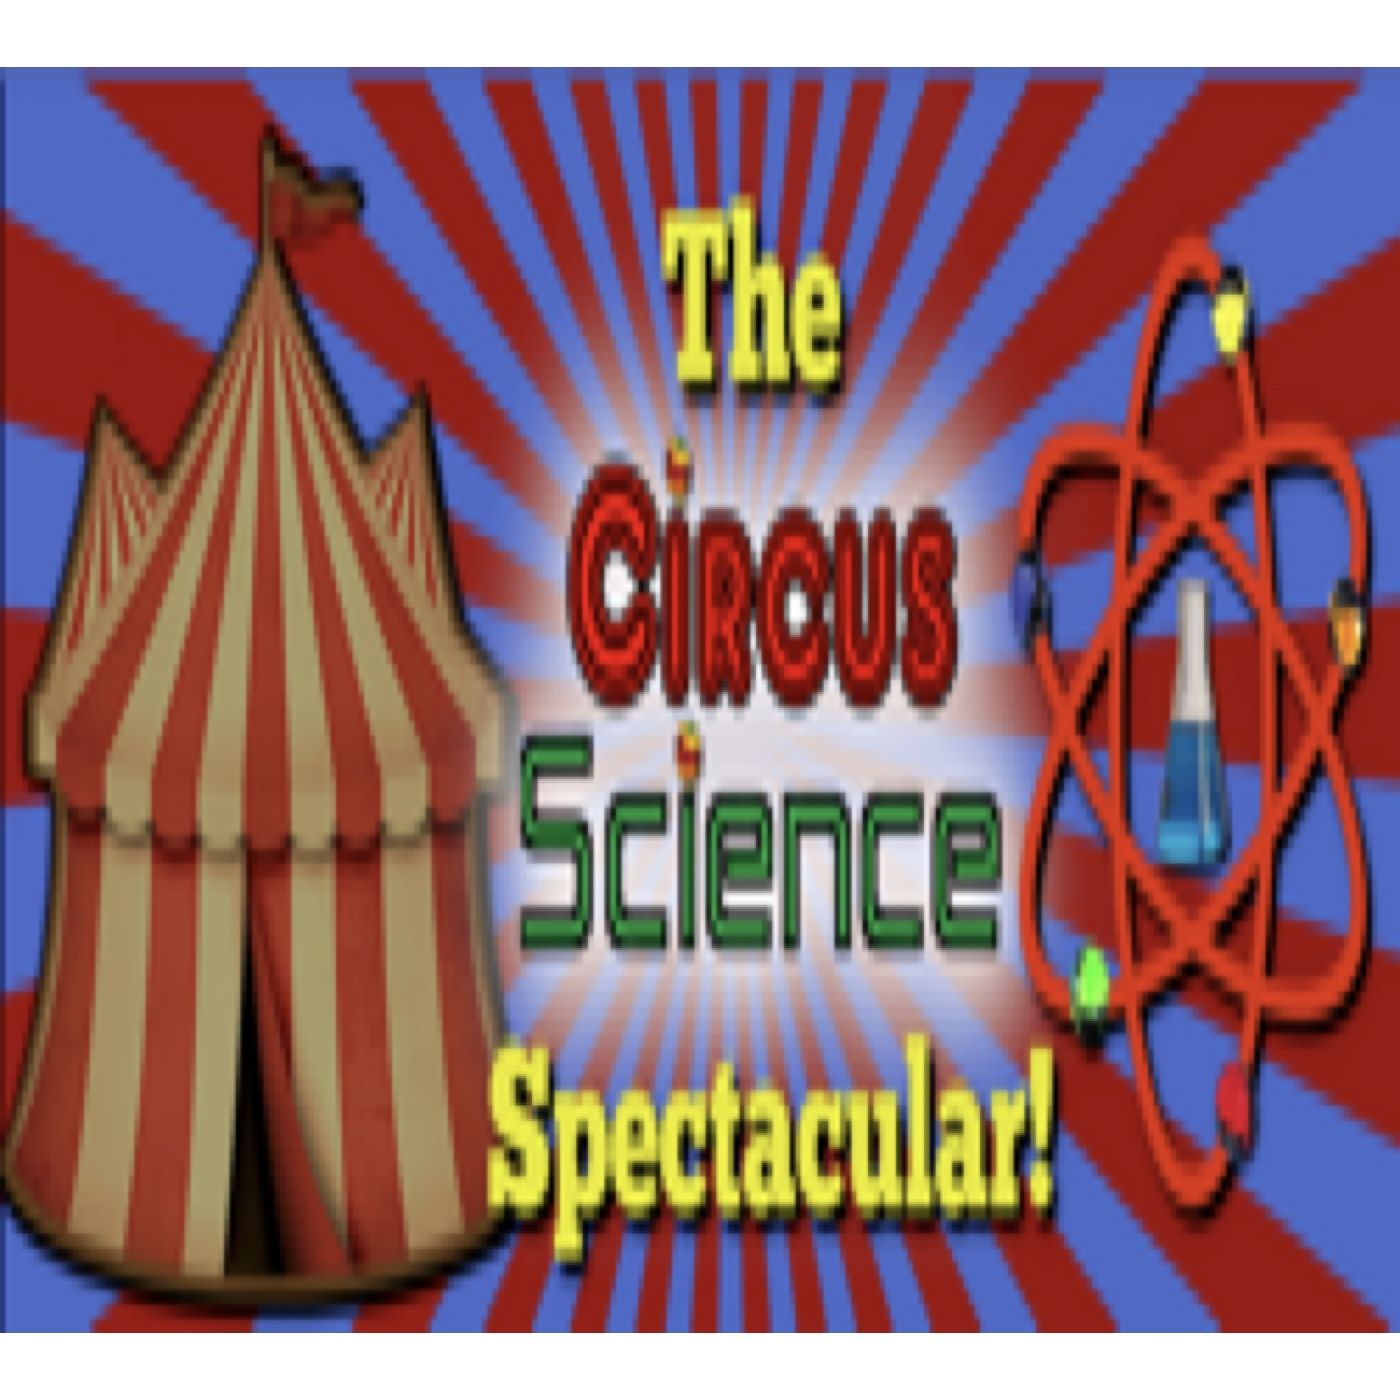 Circus Science Spectacularinterview by Countyfairgrounds